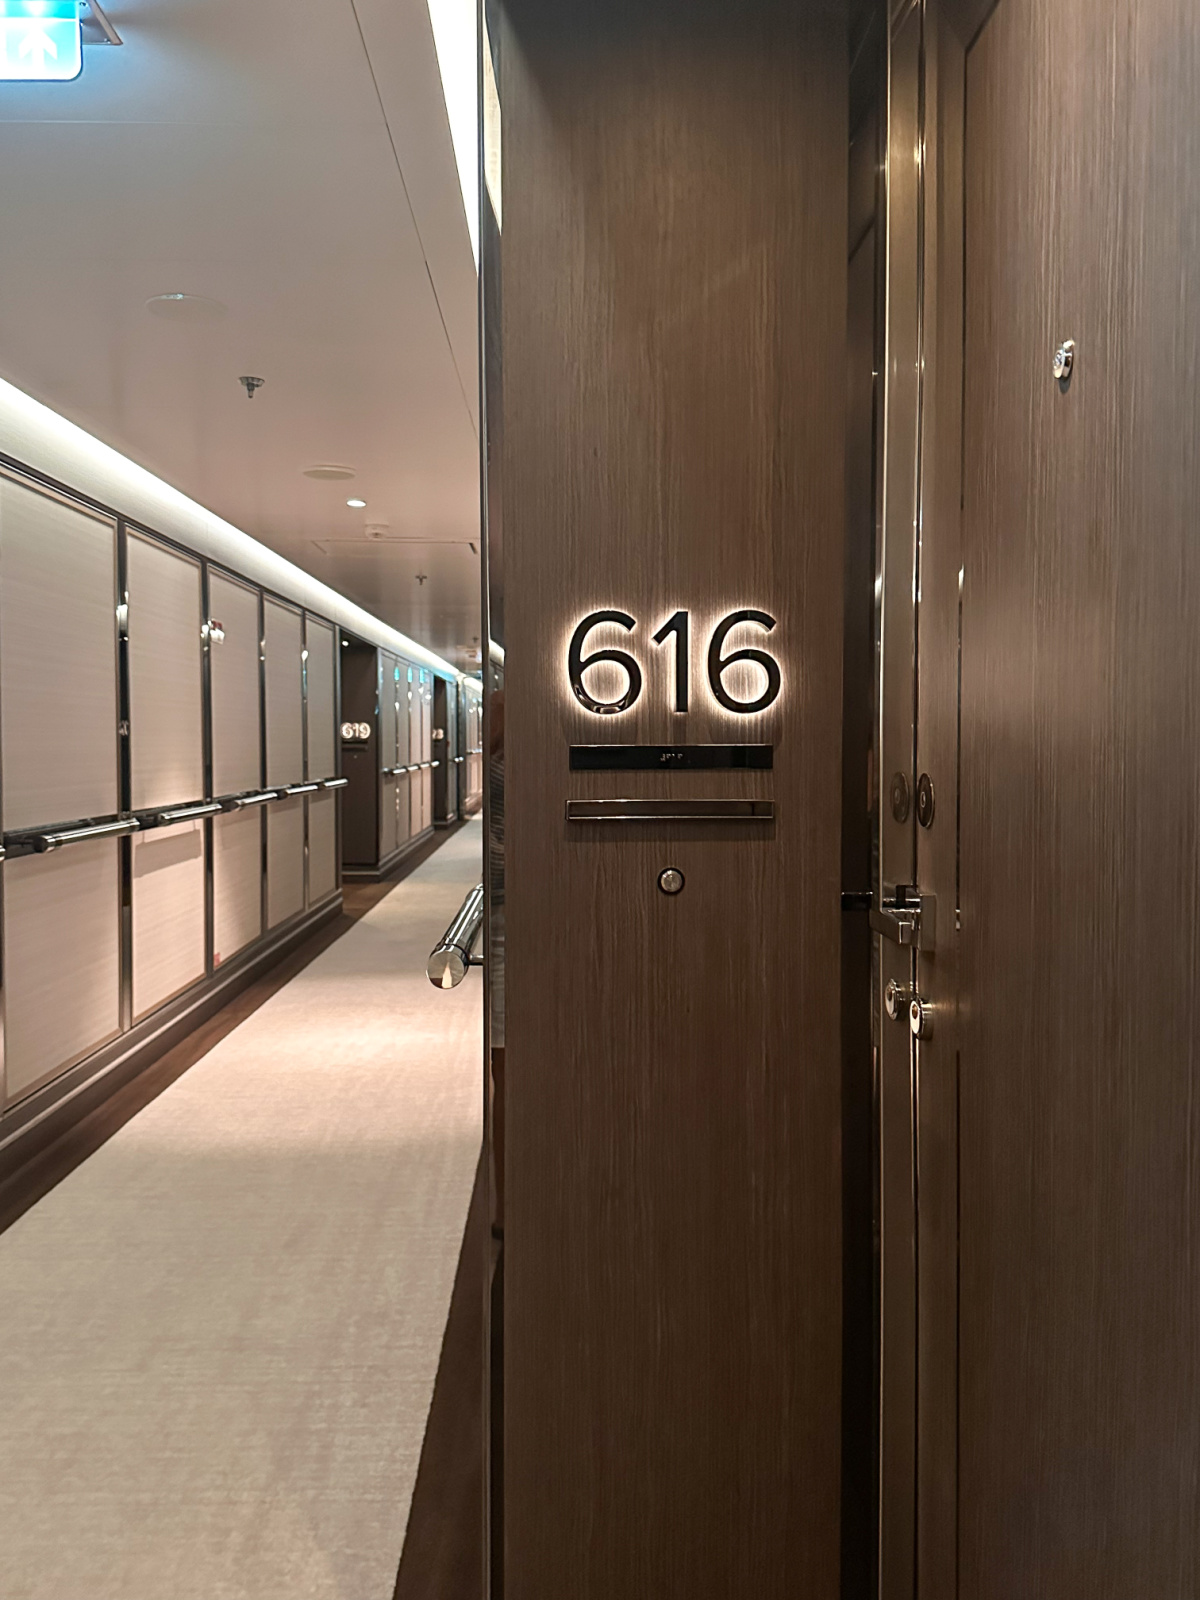 Suite 616 on Evrima yacht.